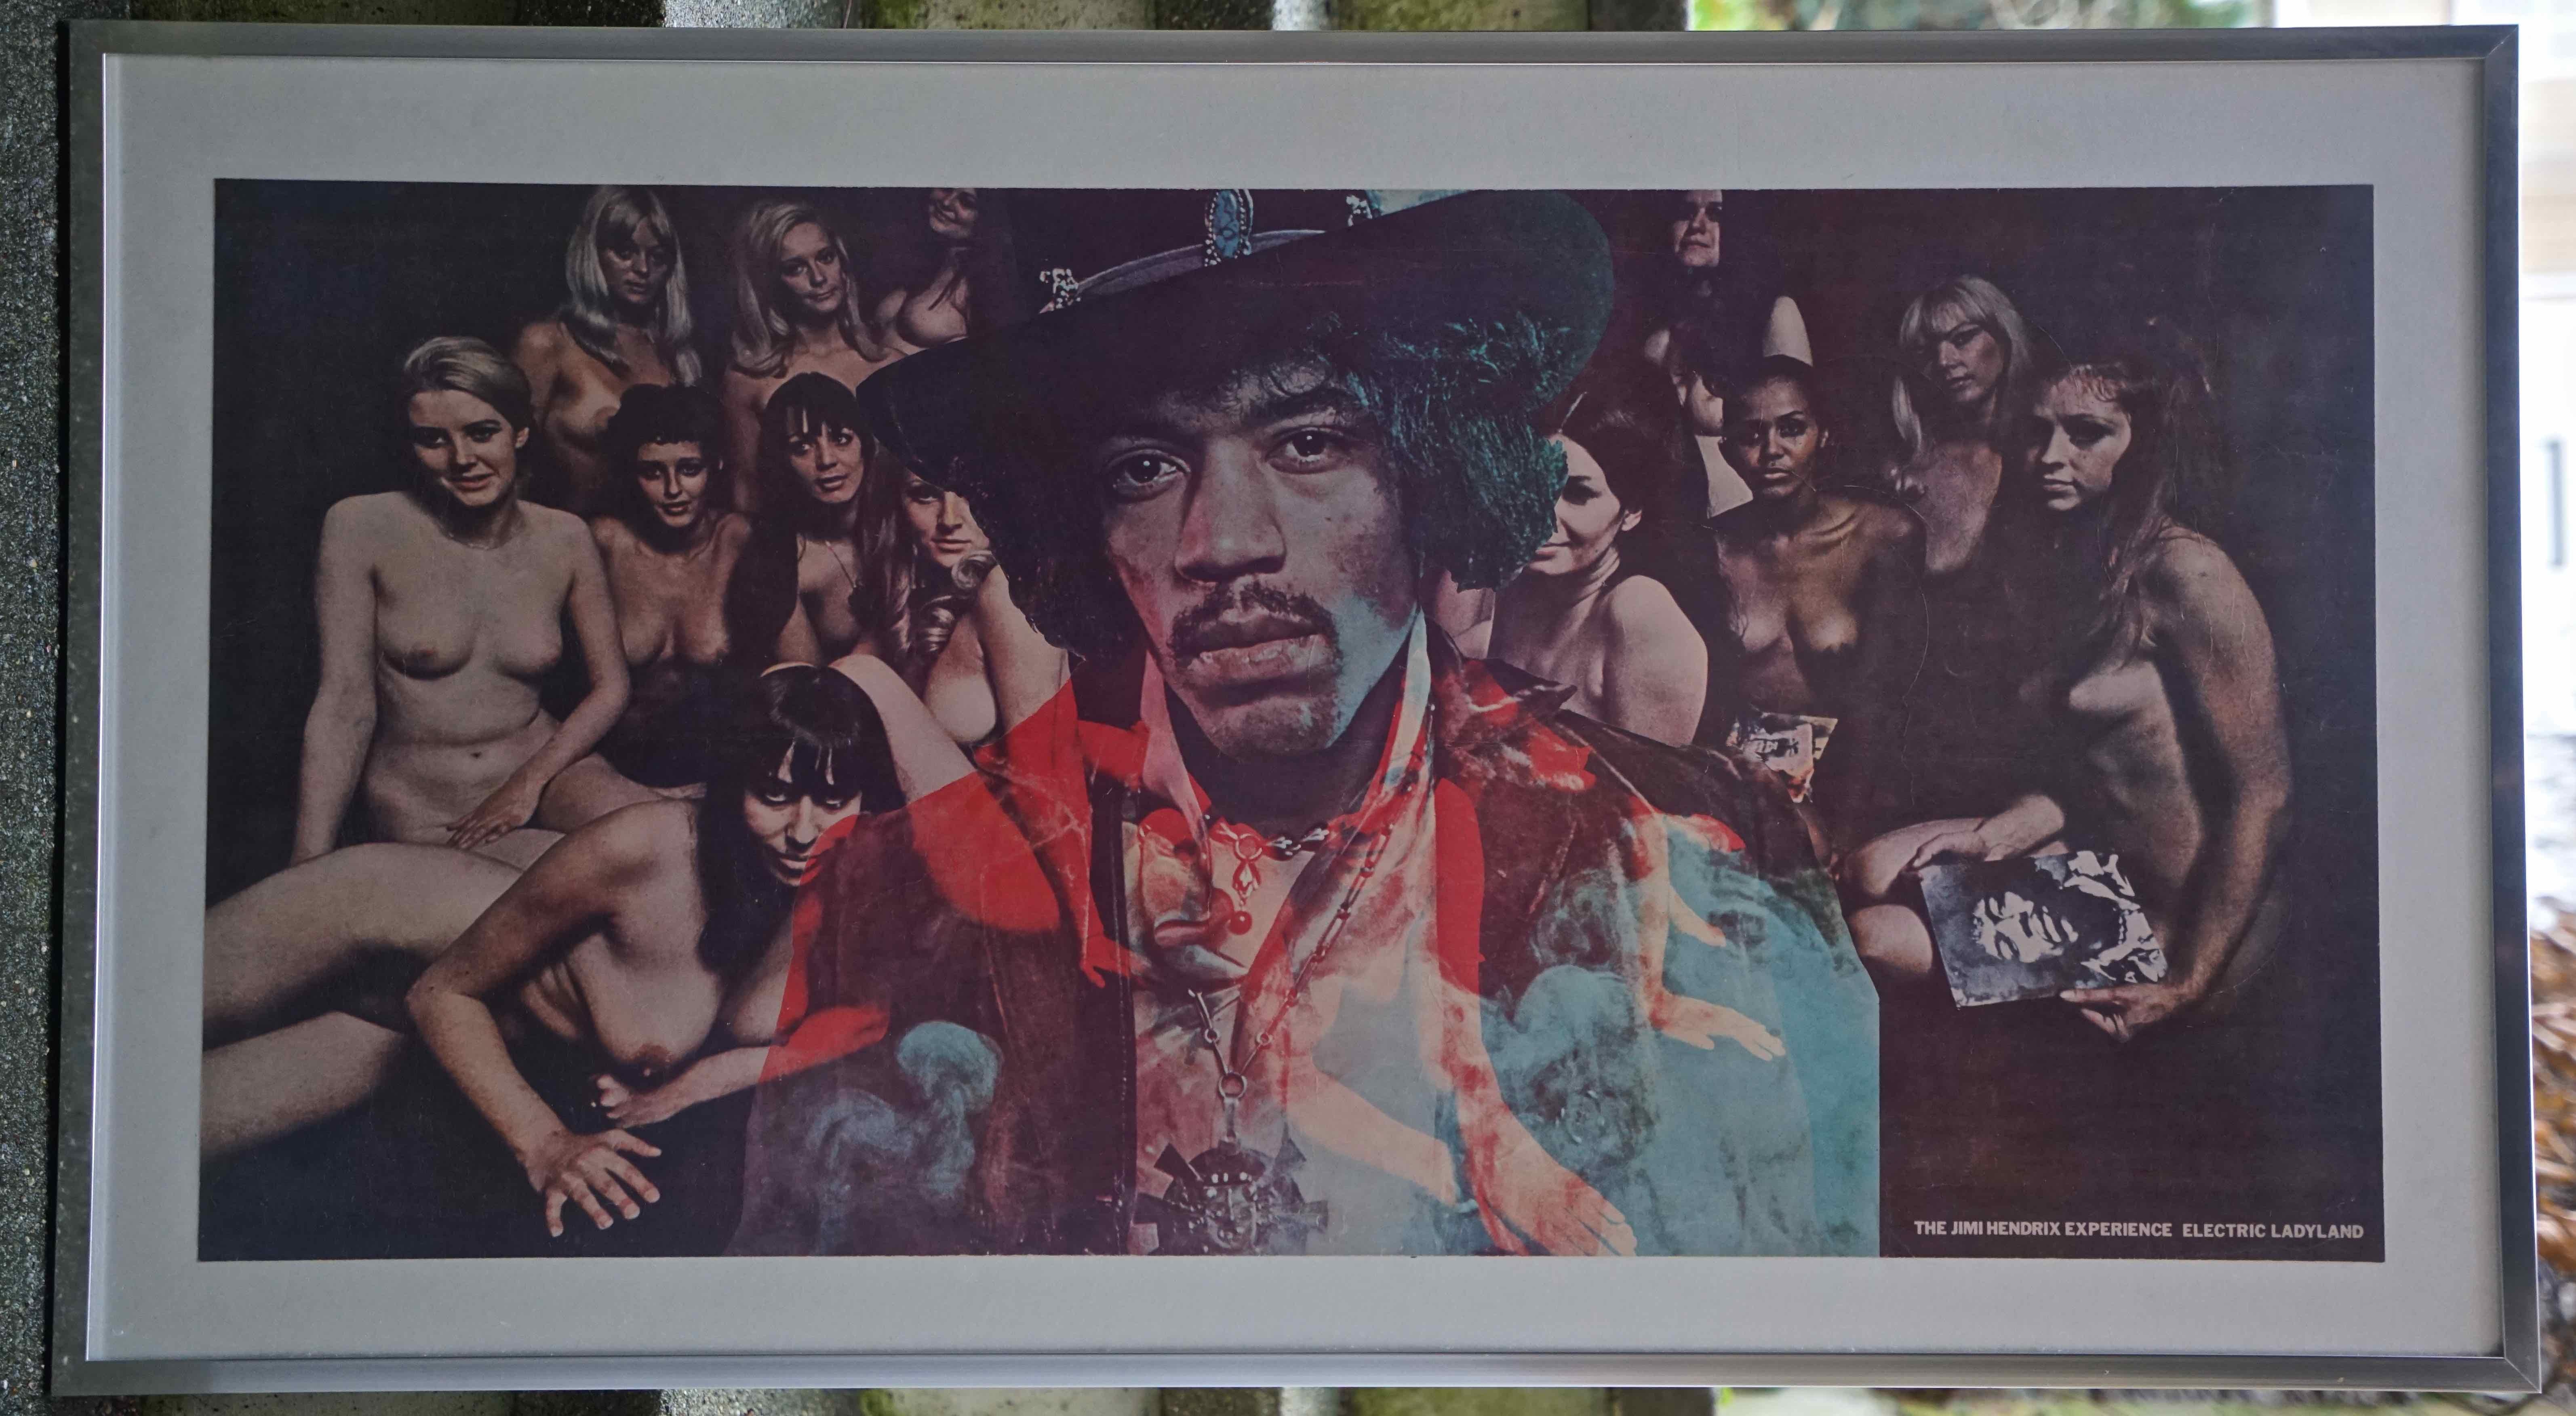 THE JIMI HENDRIX EXPERIENCE - ELECTRIC LADYLAND - ART WORK FOR - BANNED LP COVER - Art by Unknown